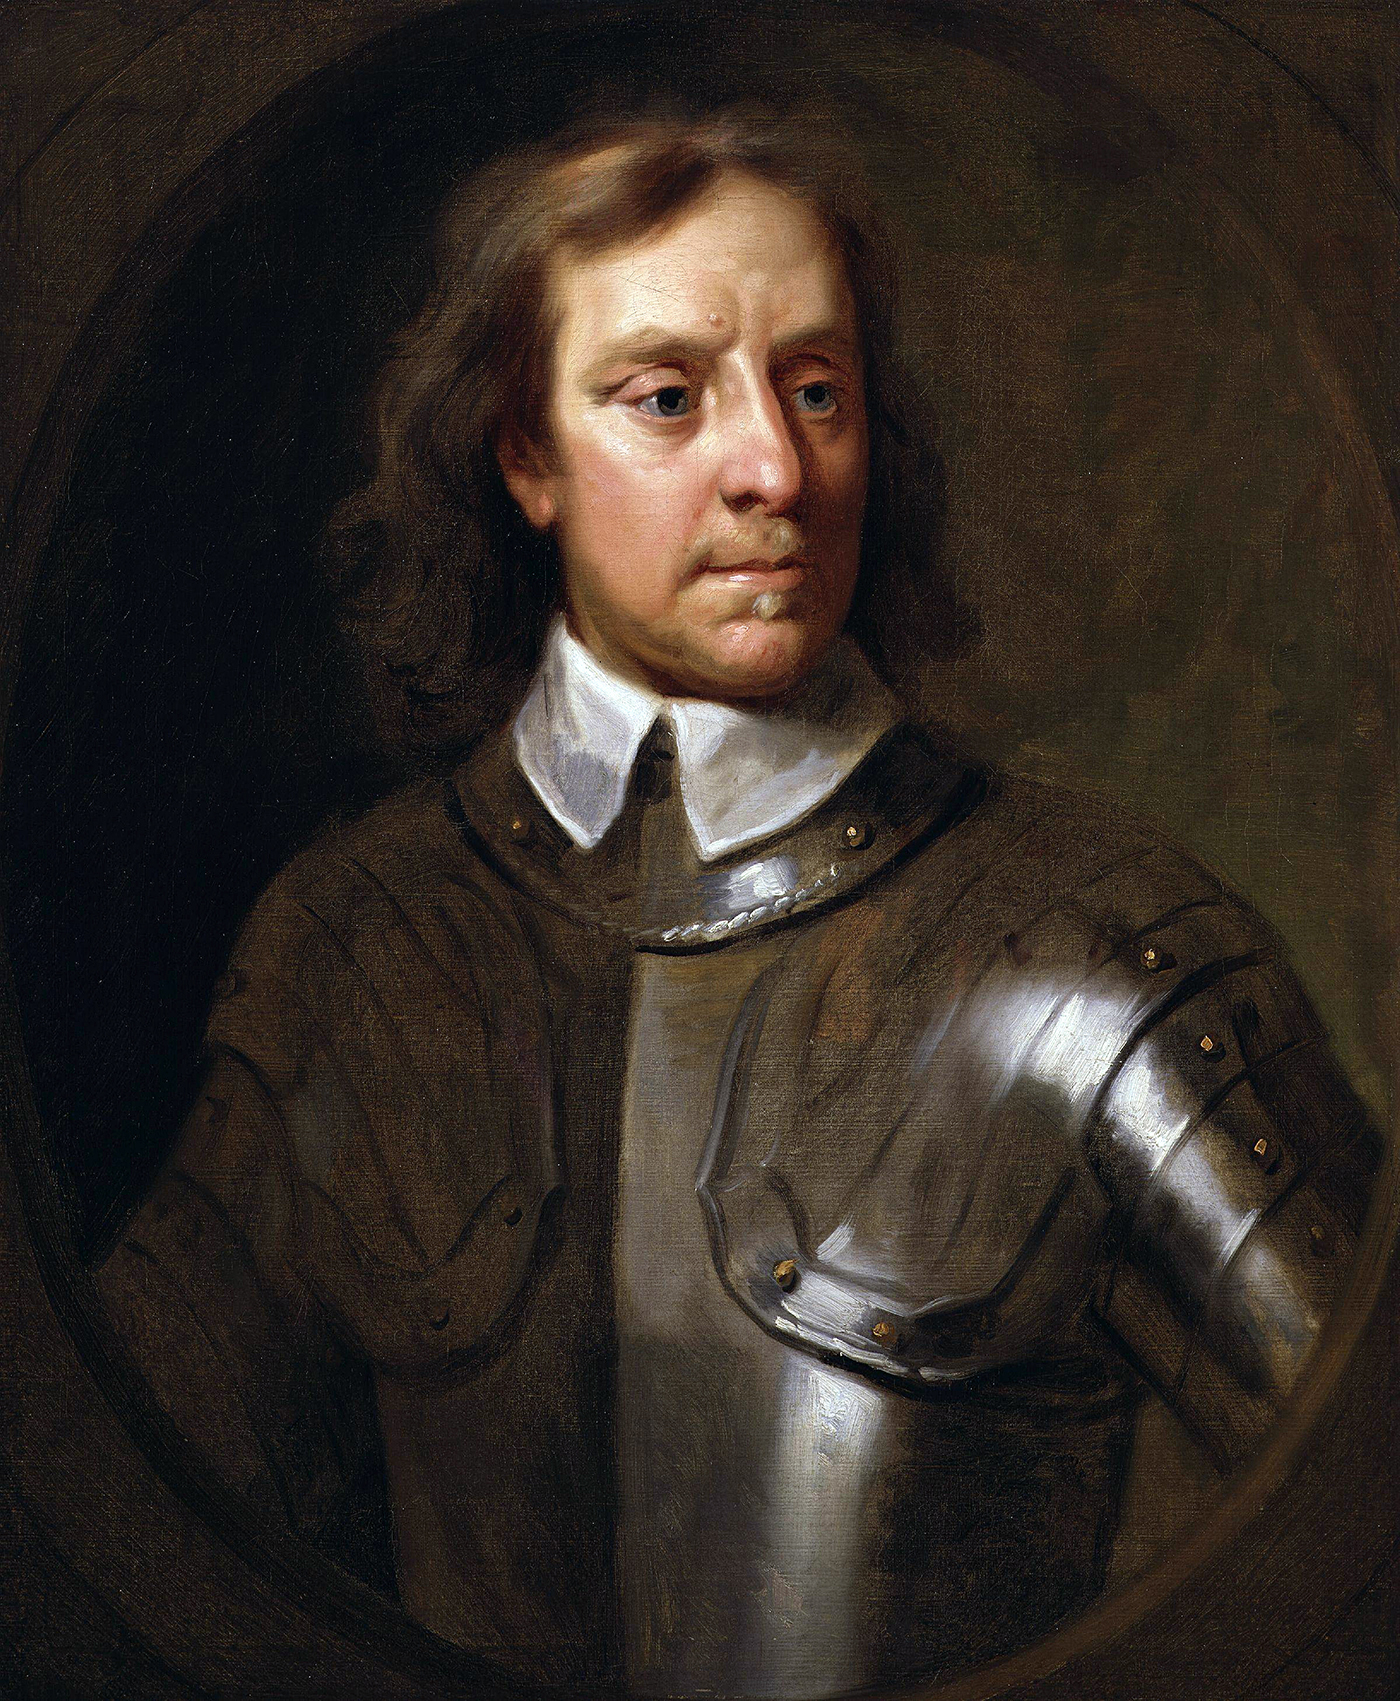 "He who stops being better stops being good." <i>â€“Oliver Cromwell (1599-1658, Leader in England whose corruption and negligence led to the deaths of more than 200,000)</i>